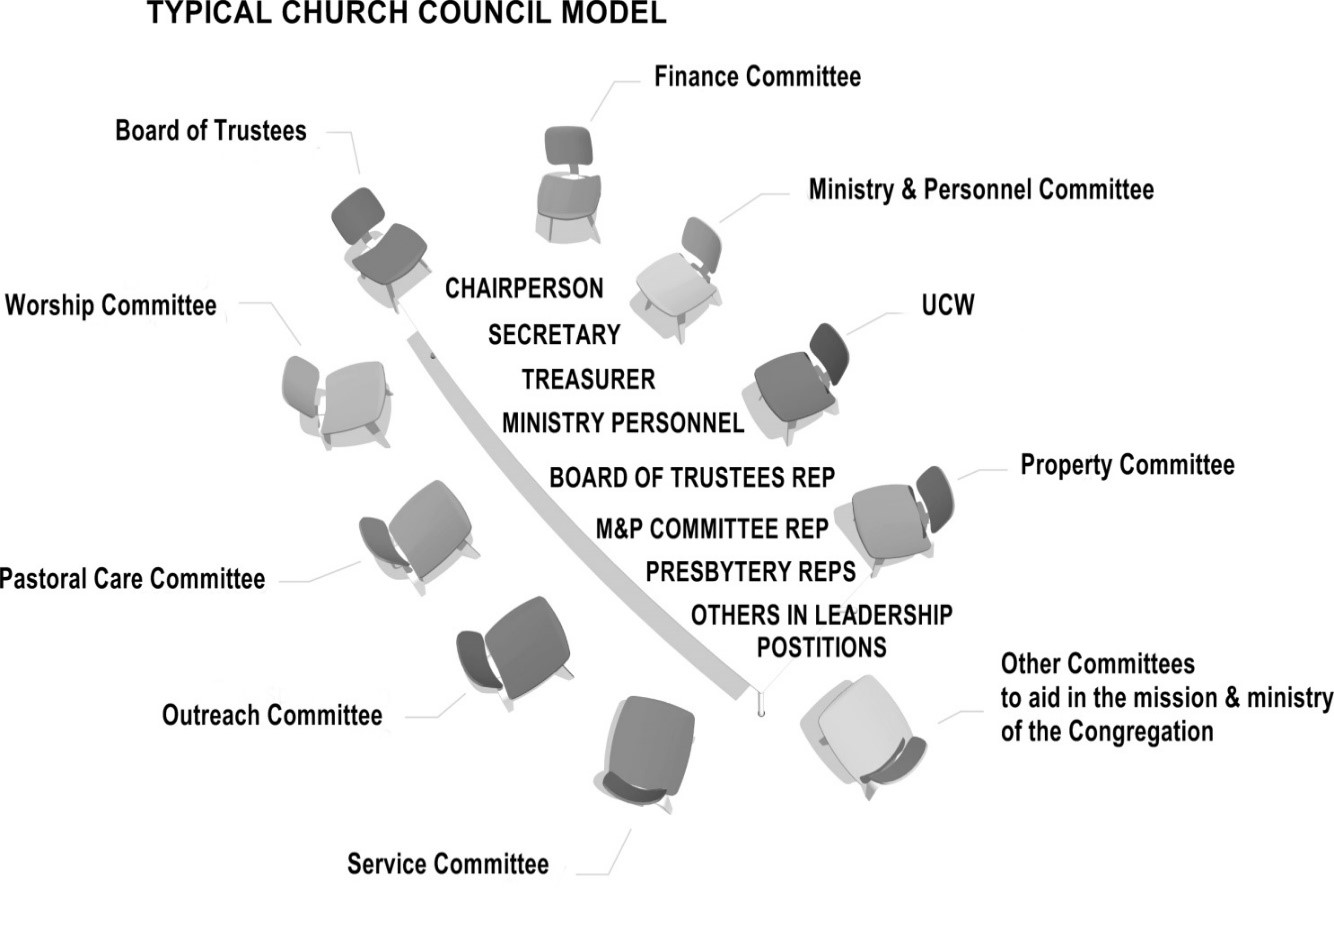 diagram of typical church council or committees